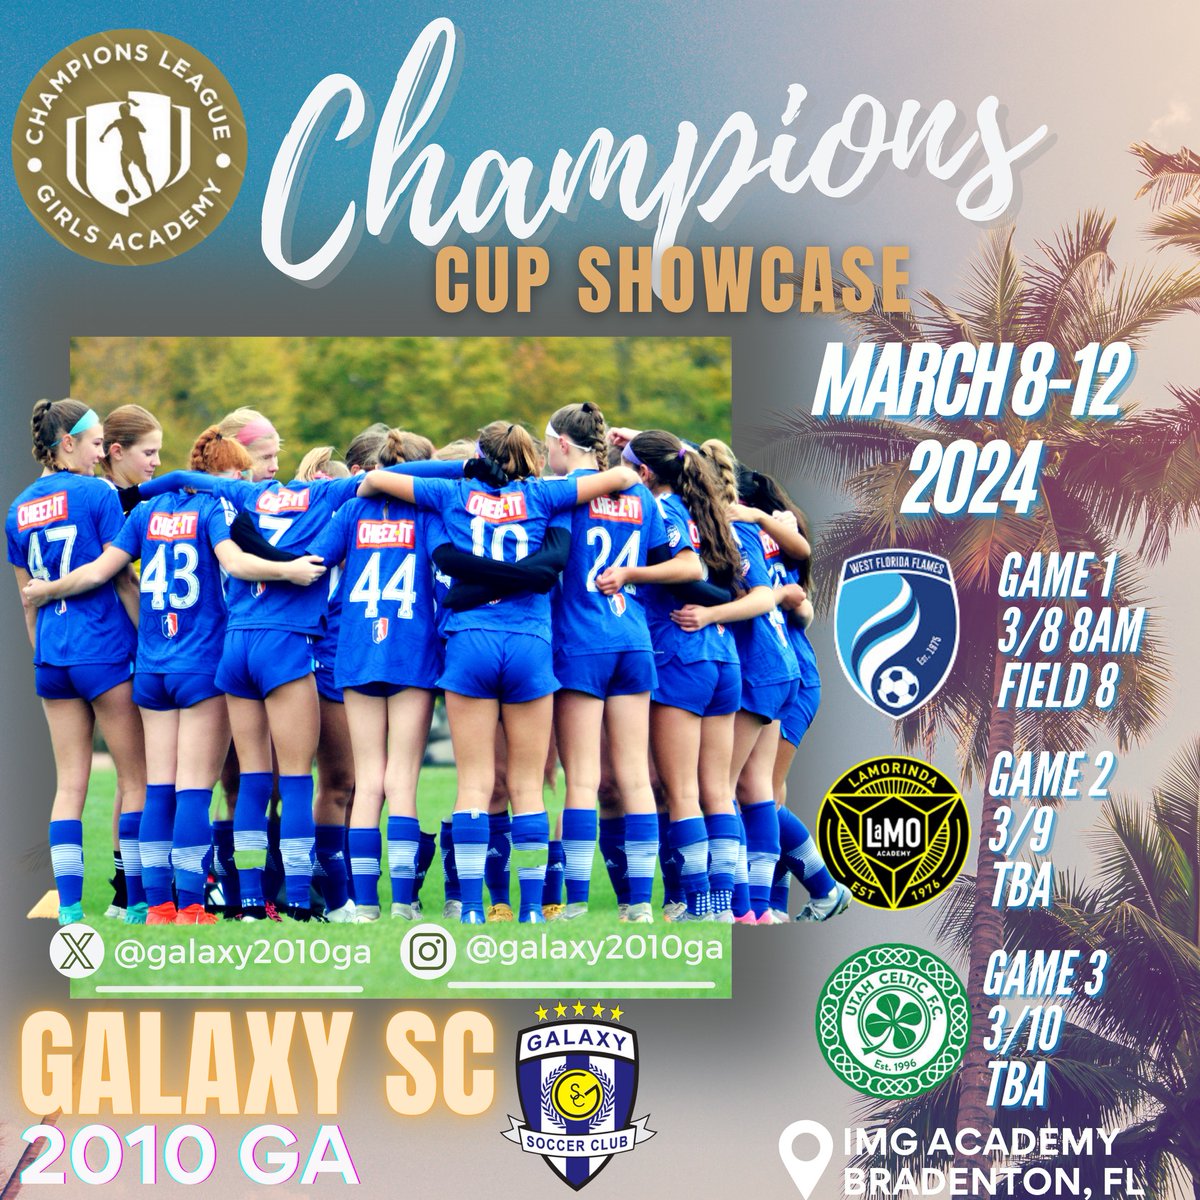 ✈️Travel day❗️❗️❗️On our way to IMG for the GA Champions Cup Showcase 🌴☀️⚽️. Thank you @GAcademyLeague for the invite to come play with some of the 🔝teams in the country.